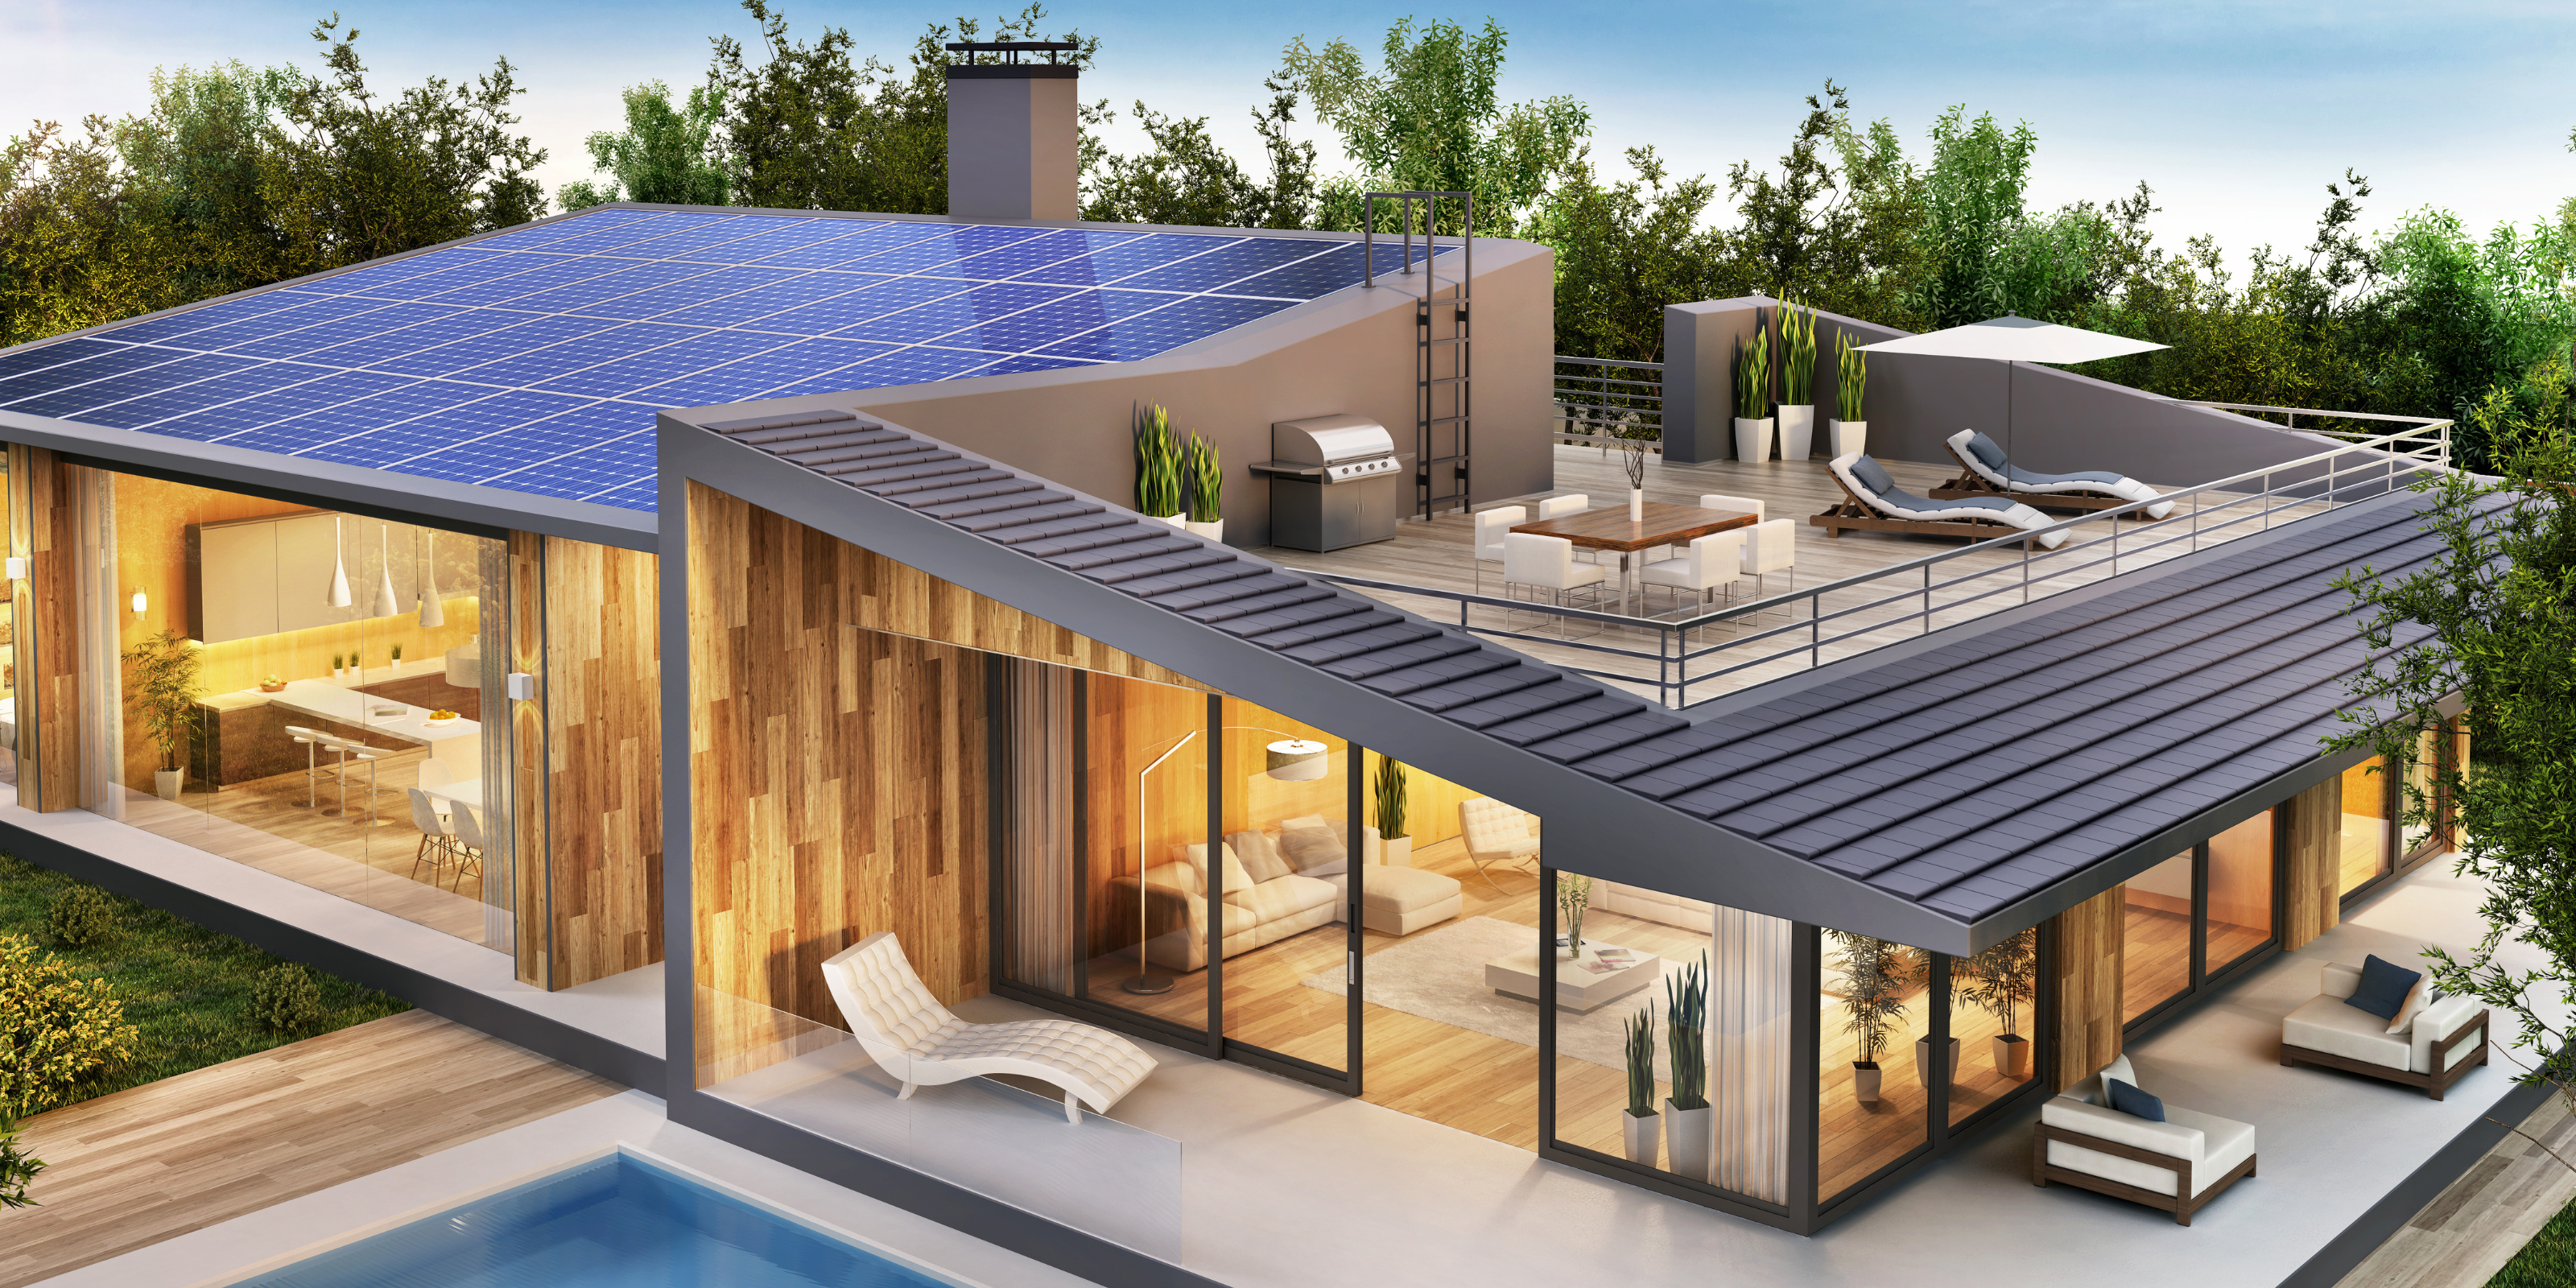 BESS (Battery Energy Storage System) features a high-capacity Lithium battery for efficient energy storage and seamless power supply to your home.